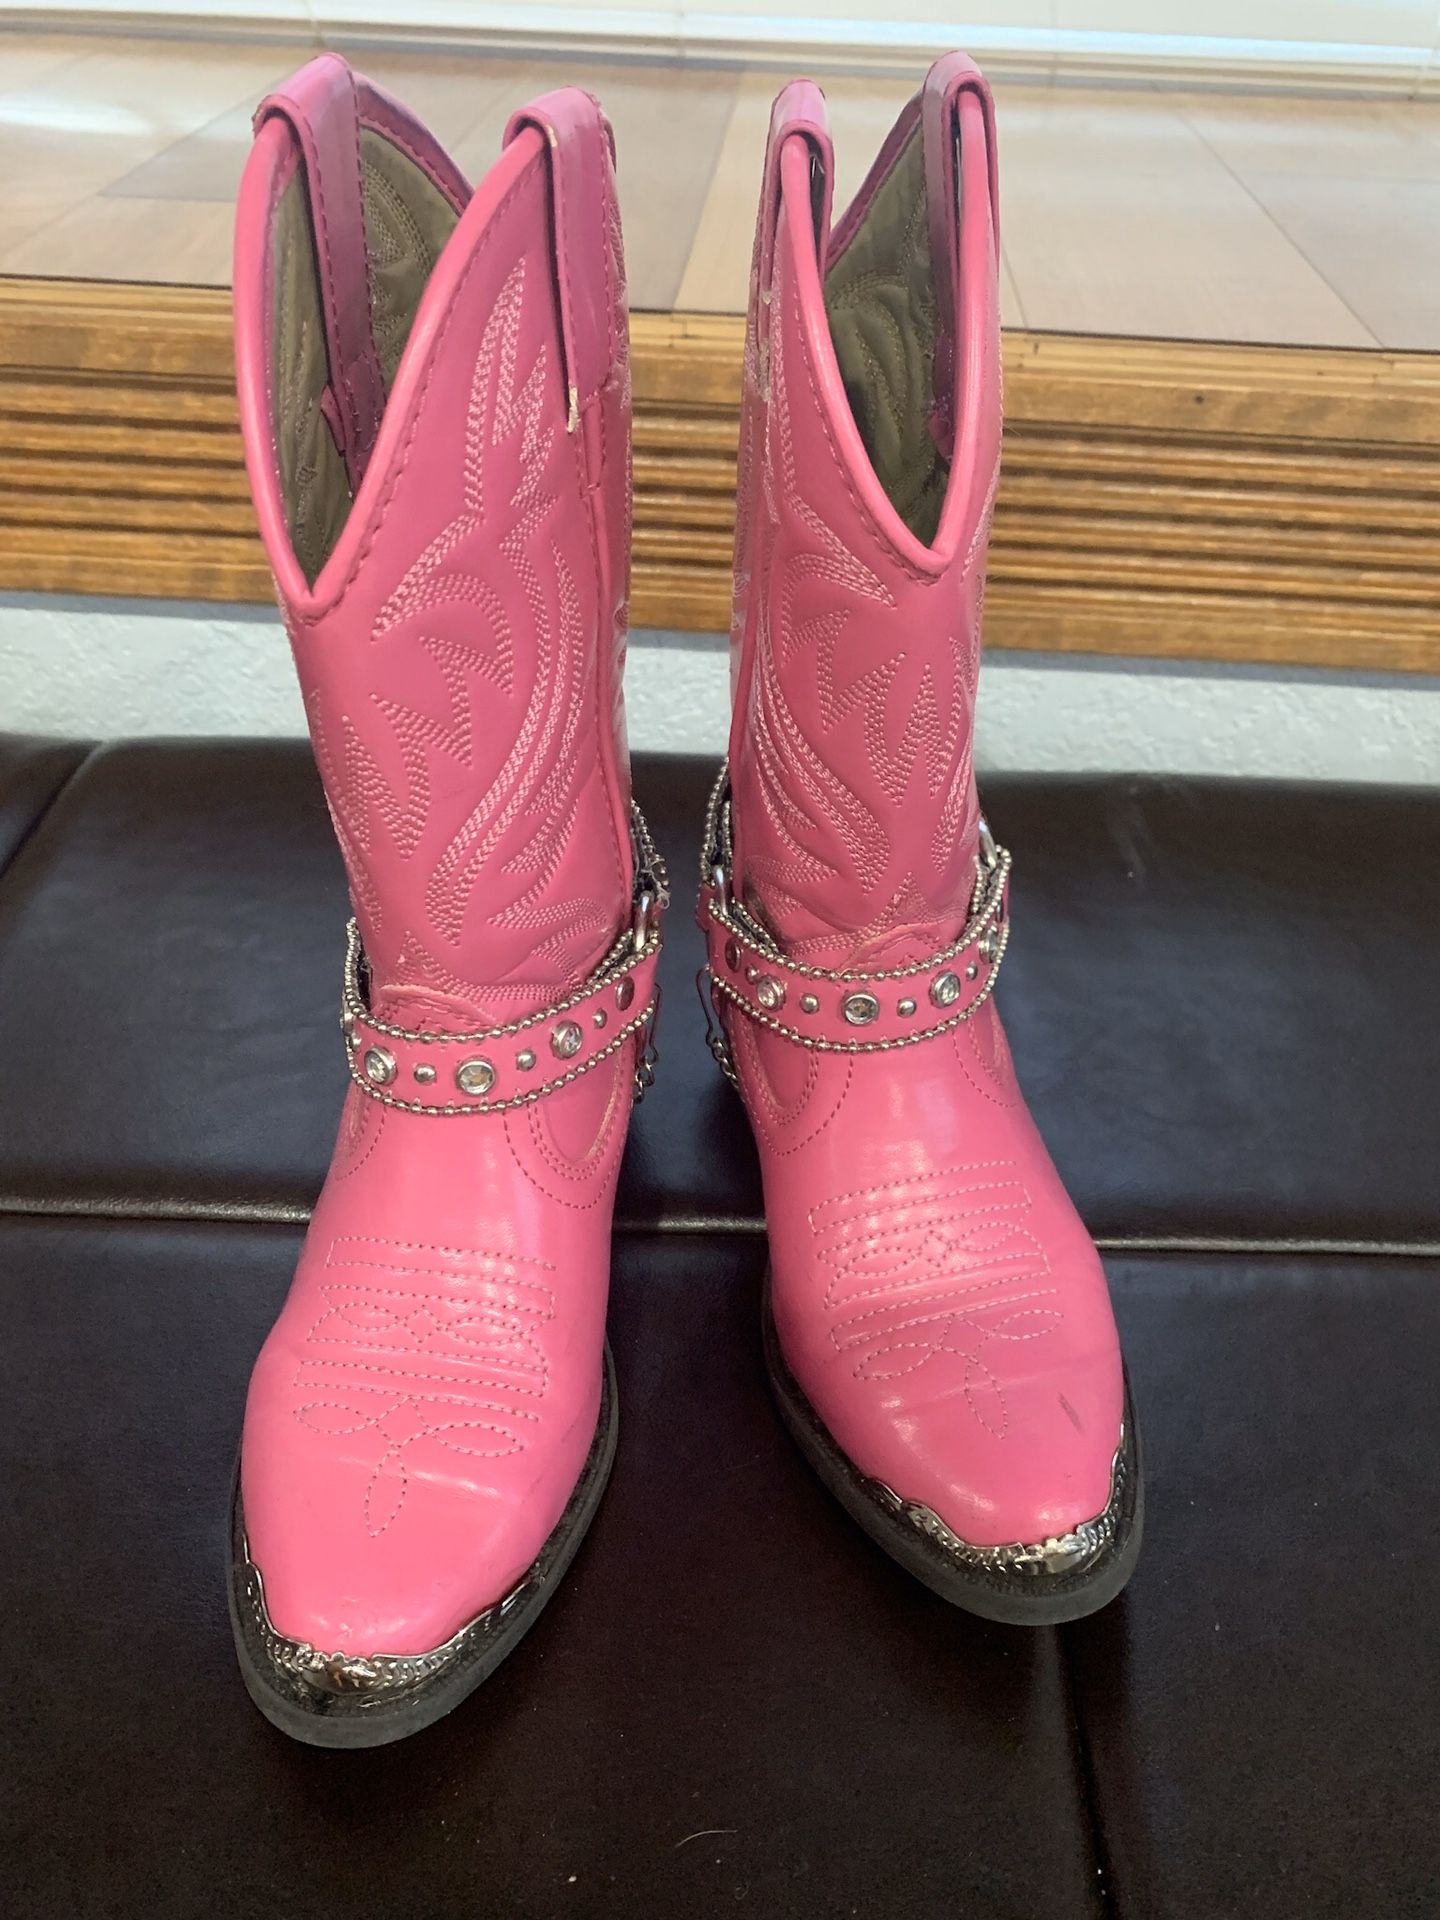 Girls cowgirl boots size 13